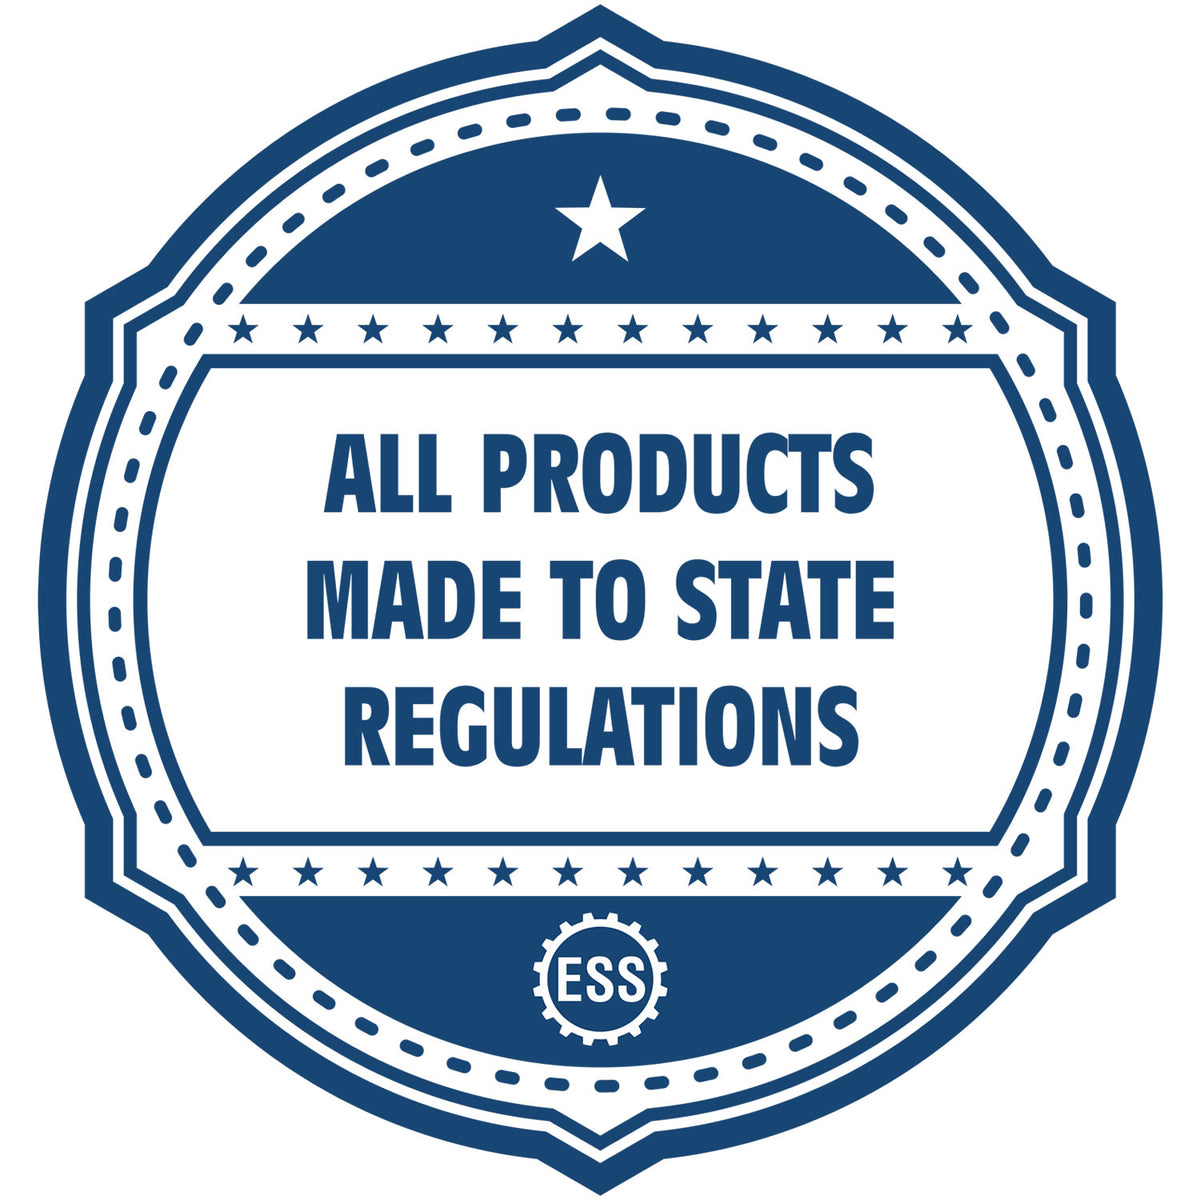 An icon or badge element for the Handheld Connecticut Architect Seal Embosser showing that this product is made in compliance with state regulations.